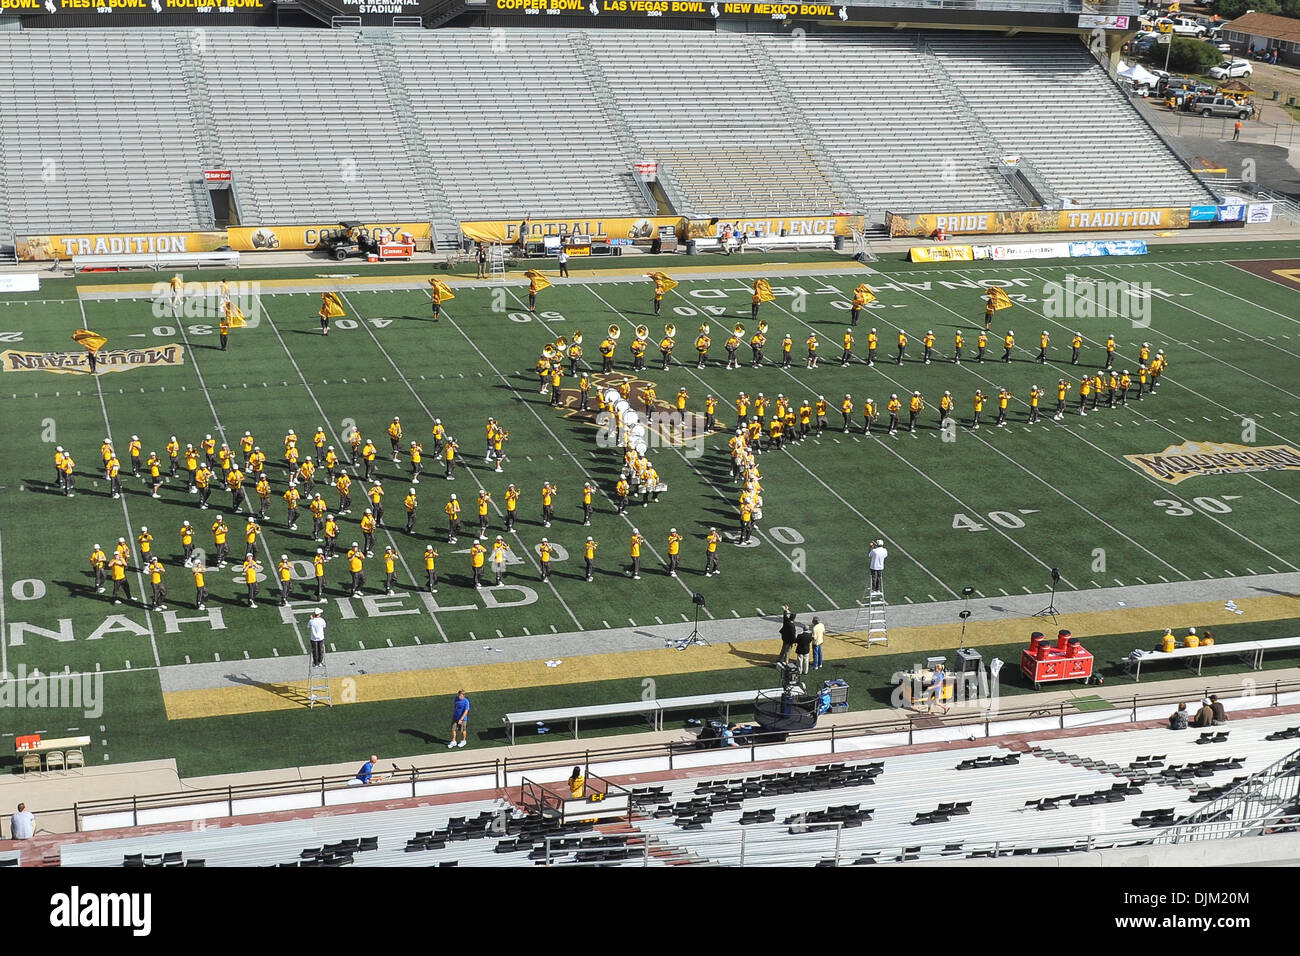 Sept. 18, 2010 - Laramie, Wyoming, United States of America - The University of Wyoming marching band makes the shape of the USS Enterprise from Star Trek prior to Boise State facing Wyoming at War Memorial Stadium. (Credit Image: © Andrew Fielding/Southcreek Global/ZUMApress.com) Stock Photo